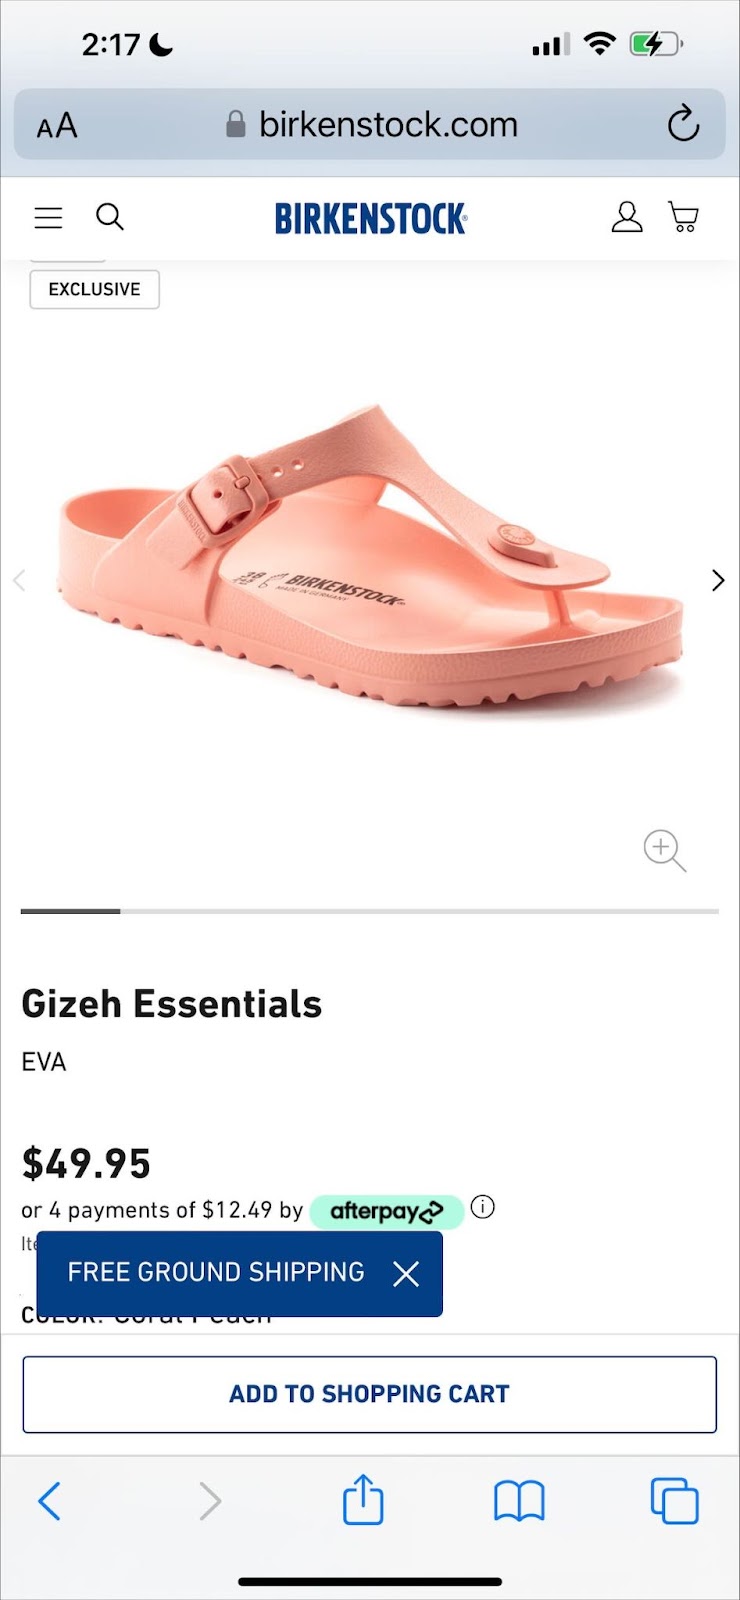 2:17 EXCLUSIVE a birkenstock.com BIRKENSTOCK Gizeh Essentials EVA $49.95 or 4 payments of $12.49 by afterpaye It FREE GROUND SHIPPING X c O ADD TO SHOPPING CART 